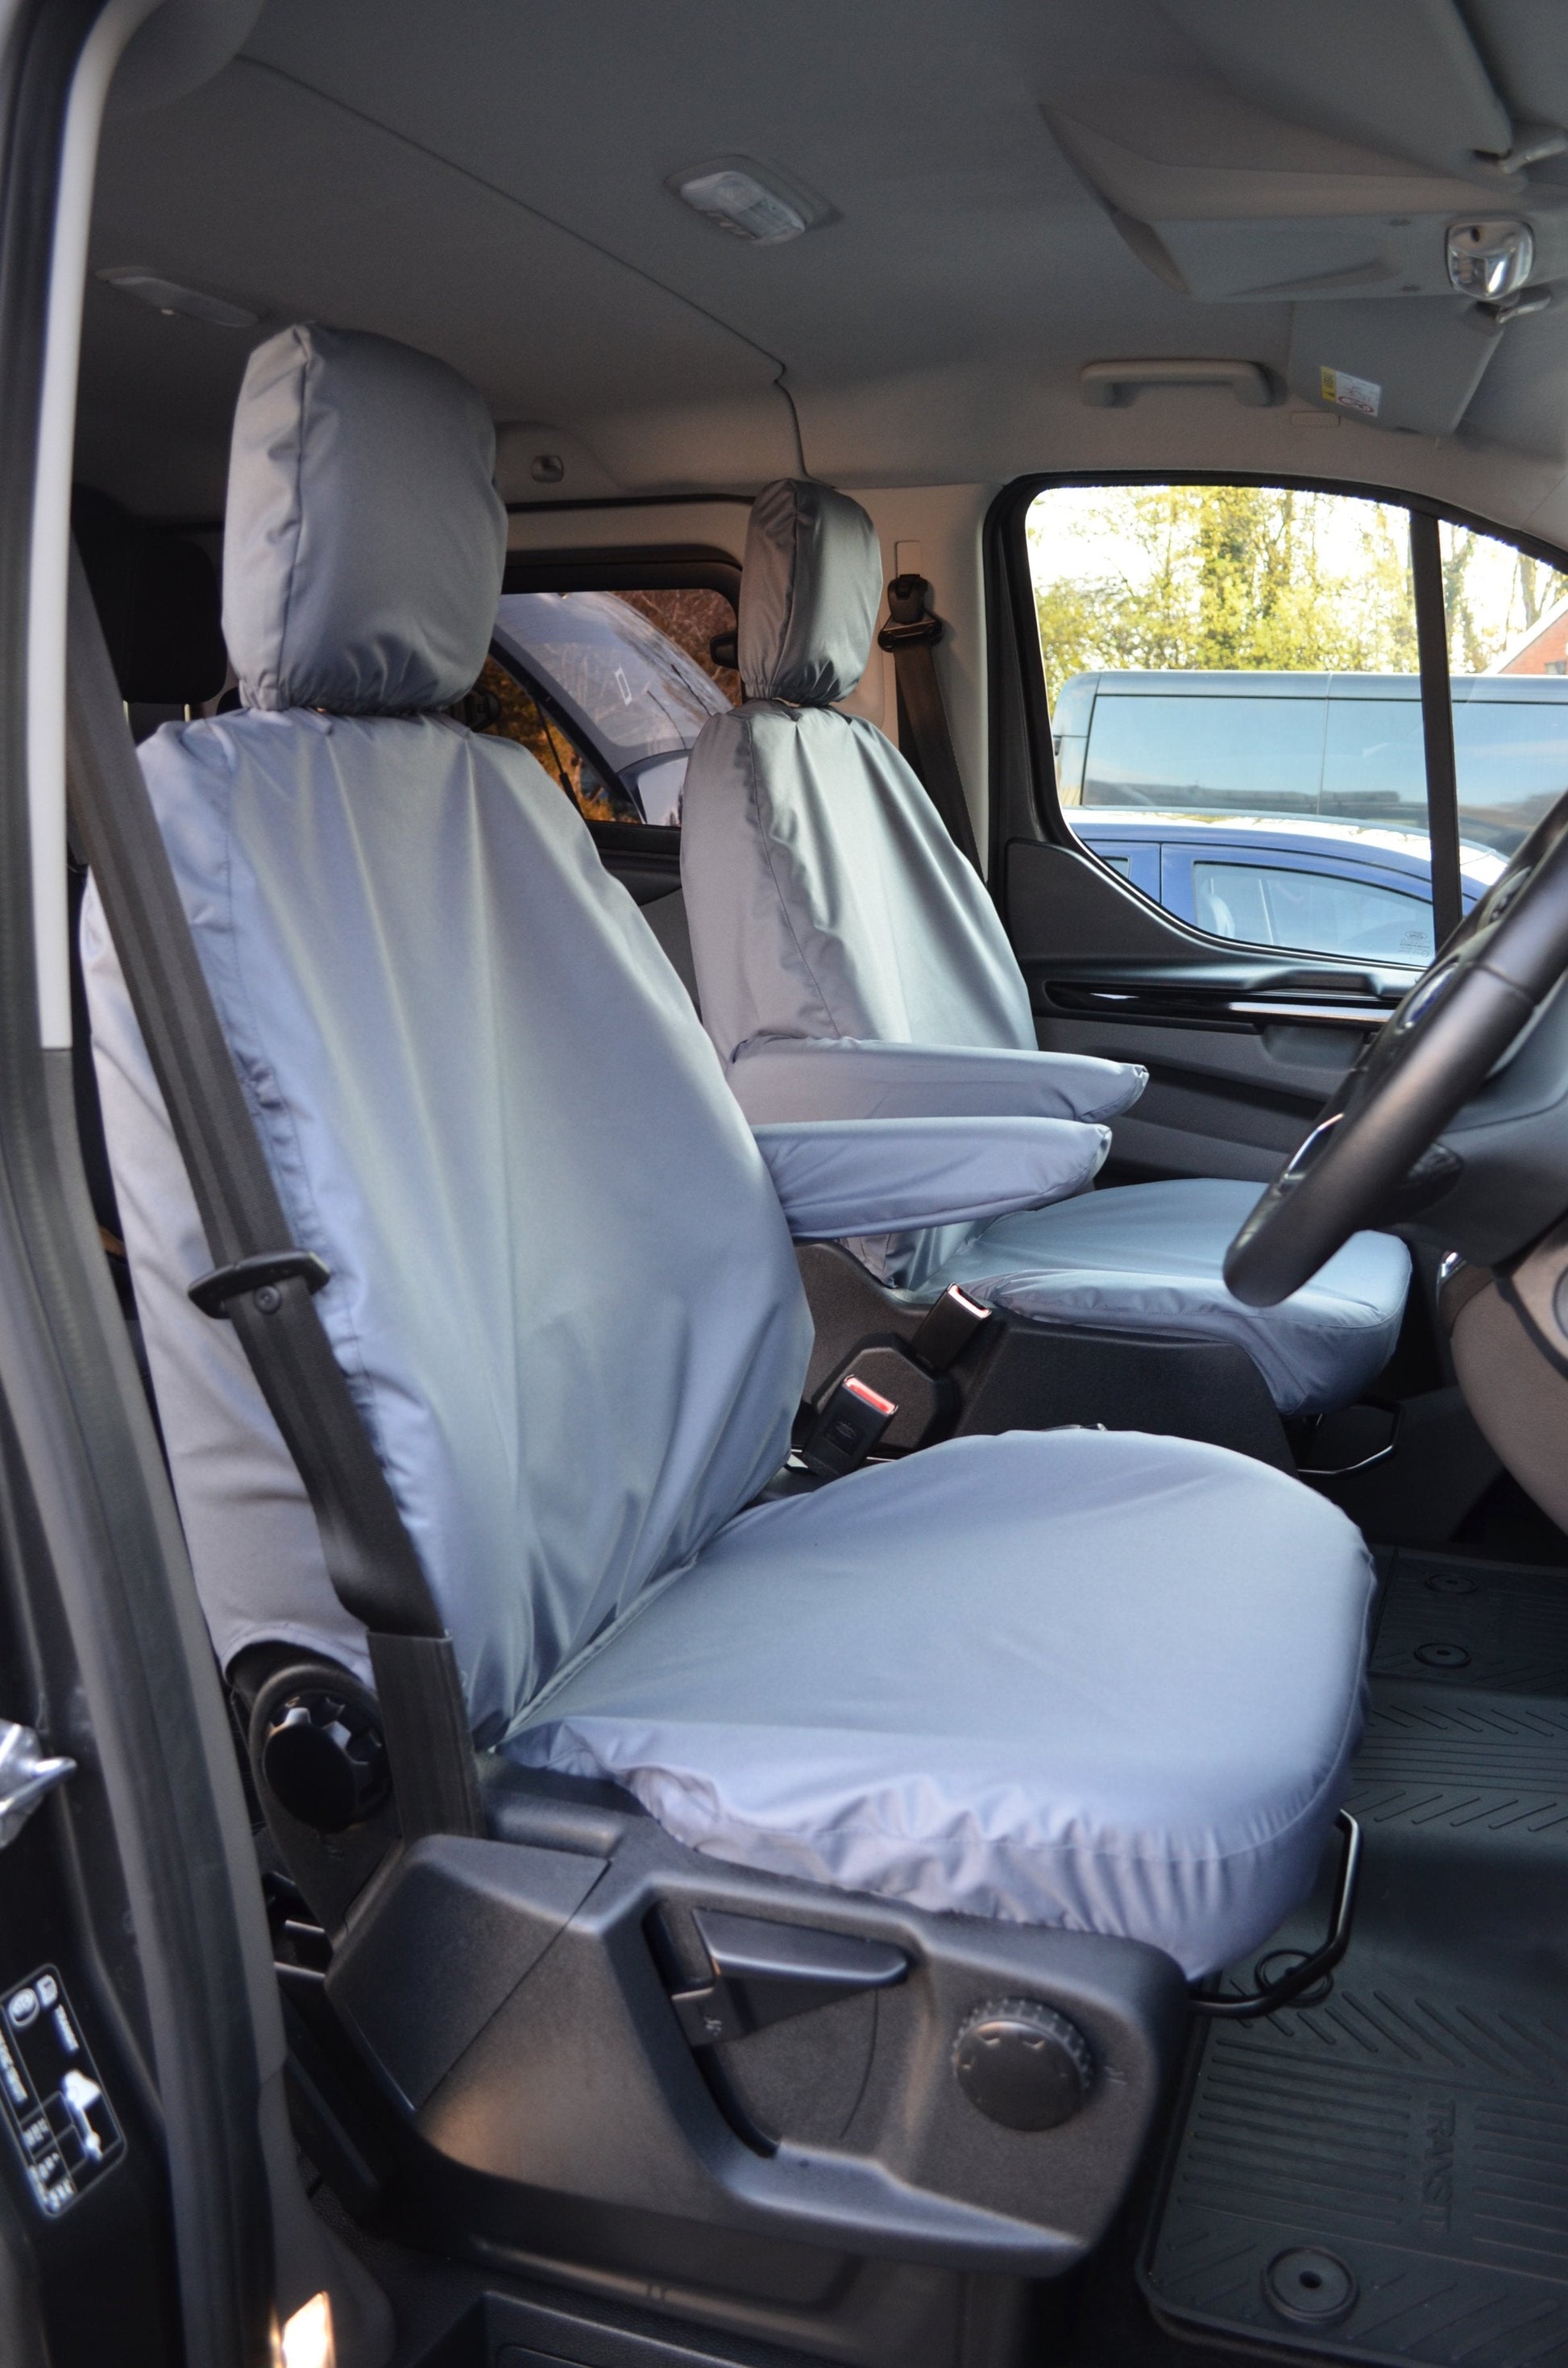 Ford Transit Custom 2013 Onwards Tailored Front Seat Covers Grey / Driver's &amp; Single Passenger Seat Covers 4 Vans Ltd